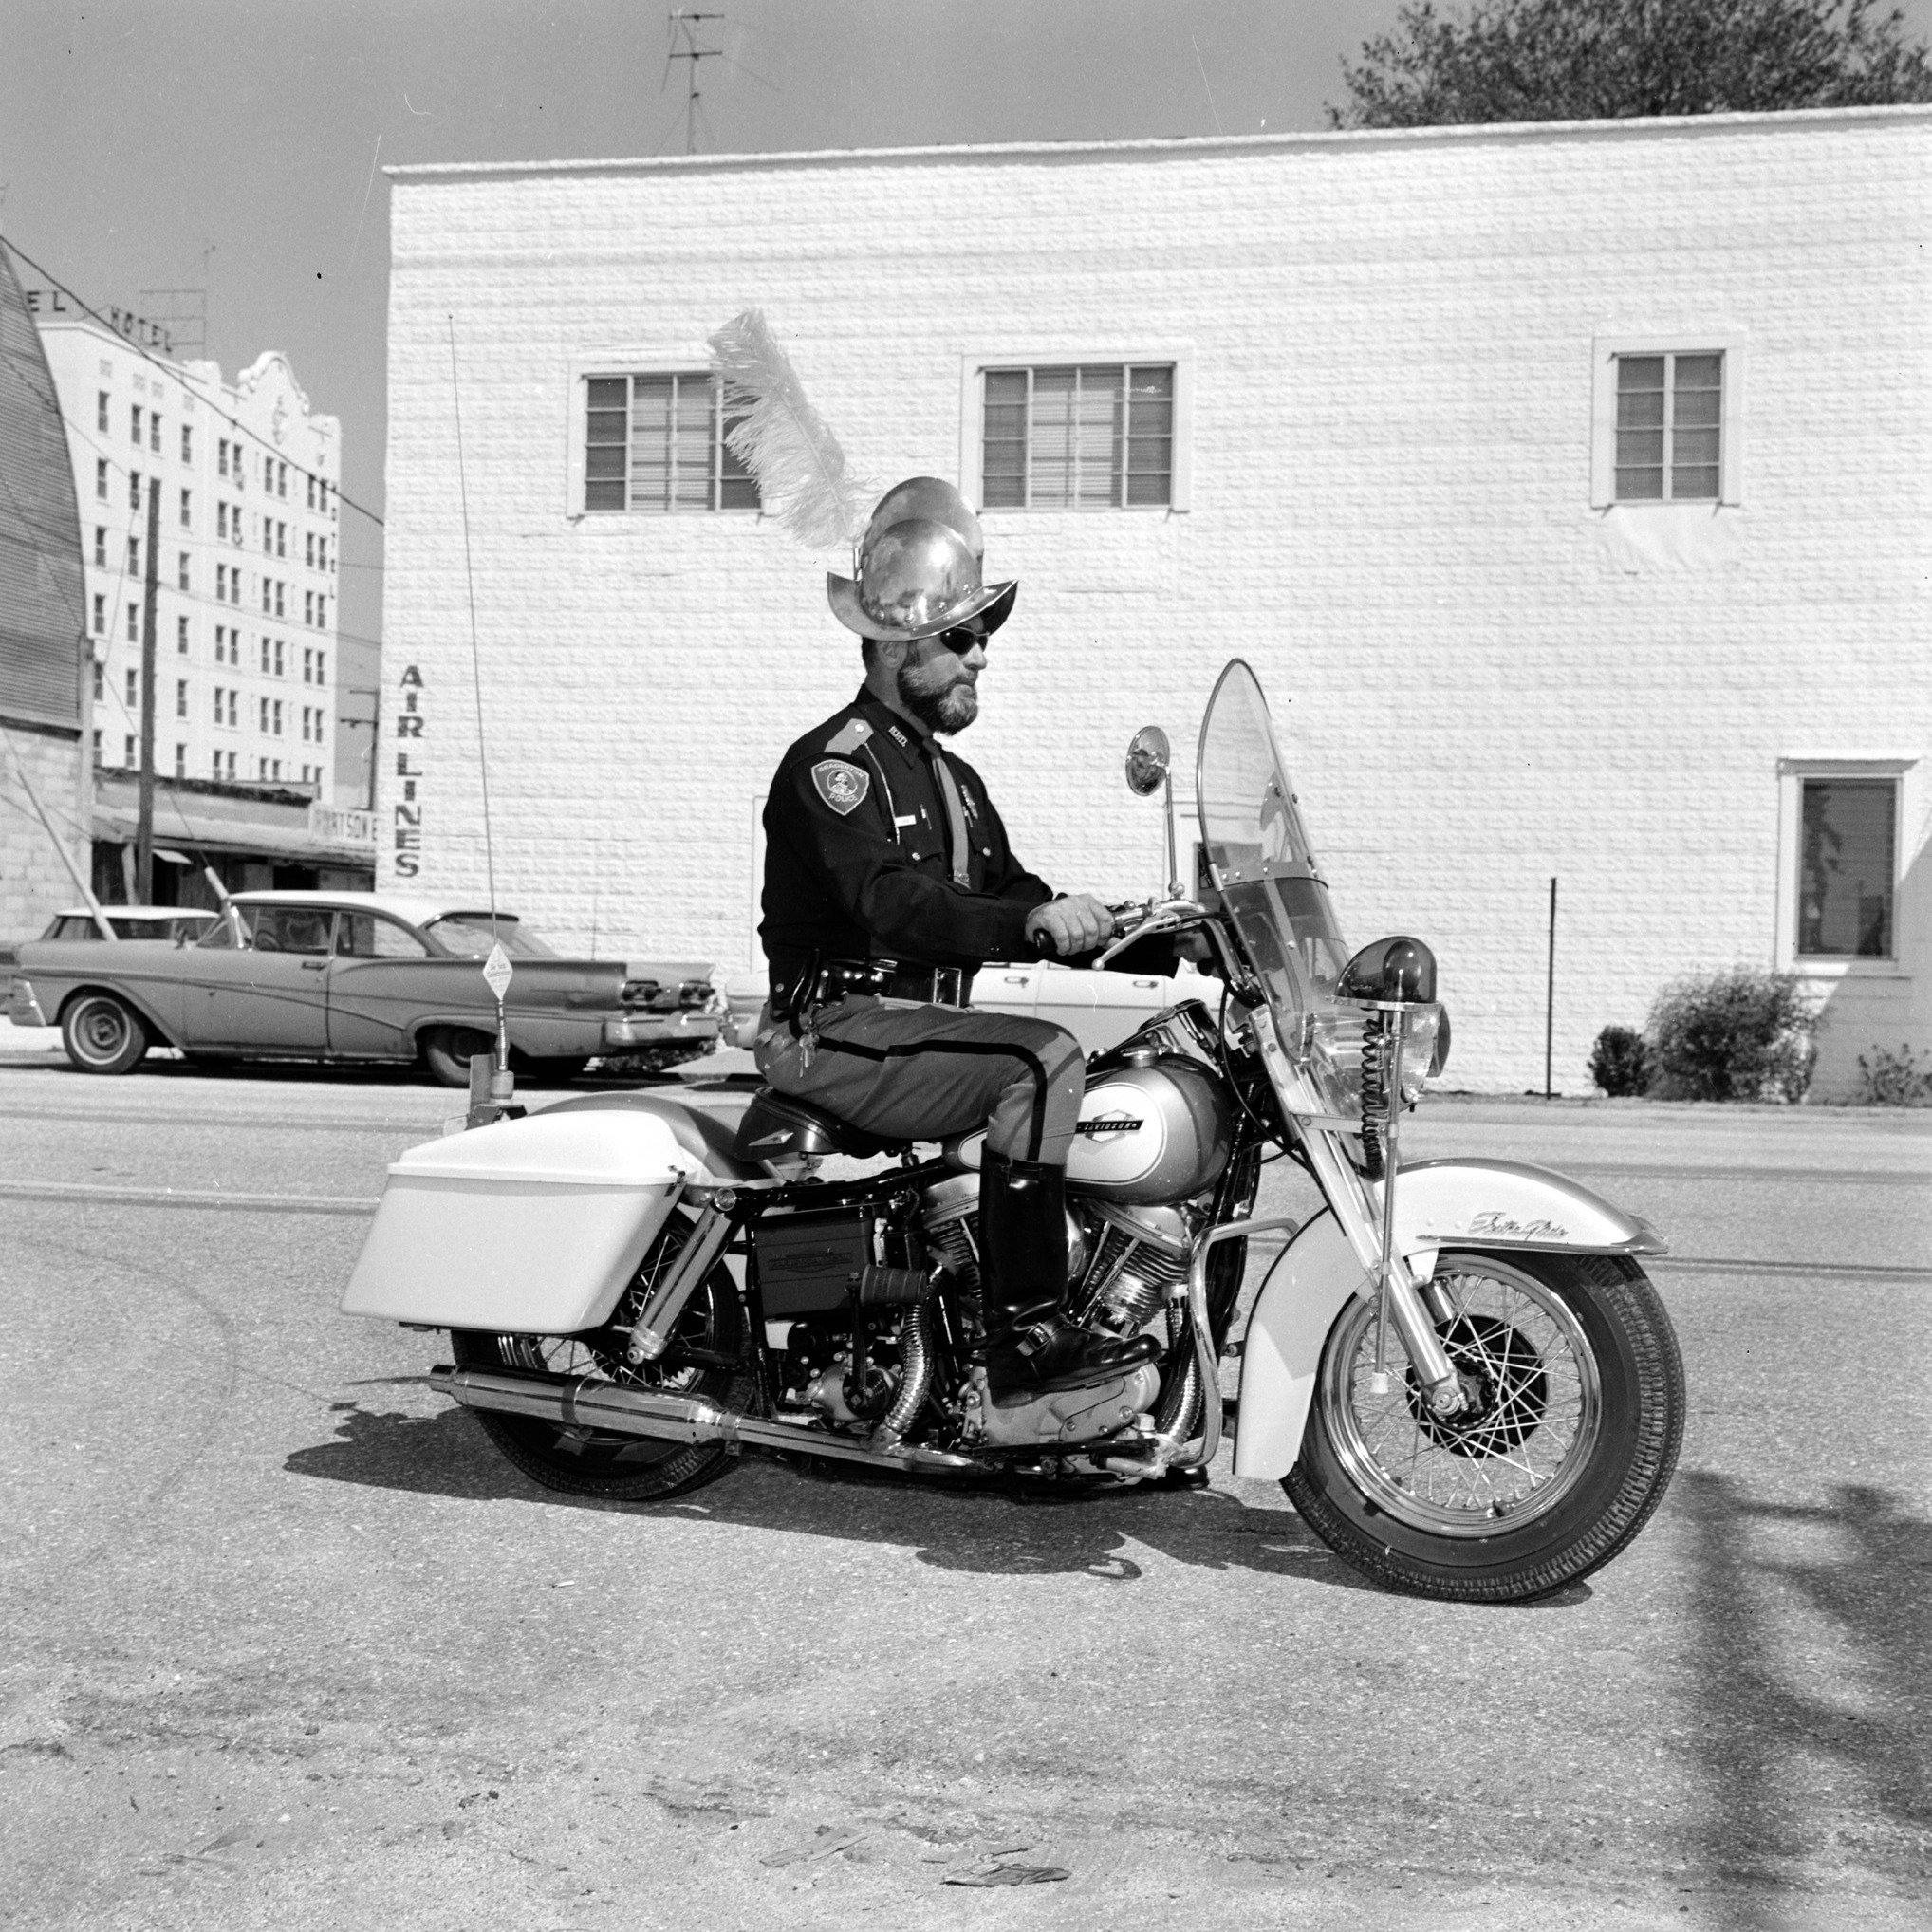 It's parade day! Here's a throwback to the mid-1960s, when a BPD motorcycle officer went all out on the big day. Before heading downtown or lining up along the parade route, take a minute to plan your drive. Scroll down our feed for a map, or see the